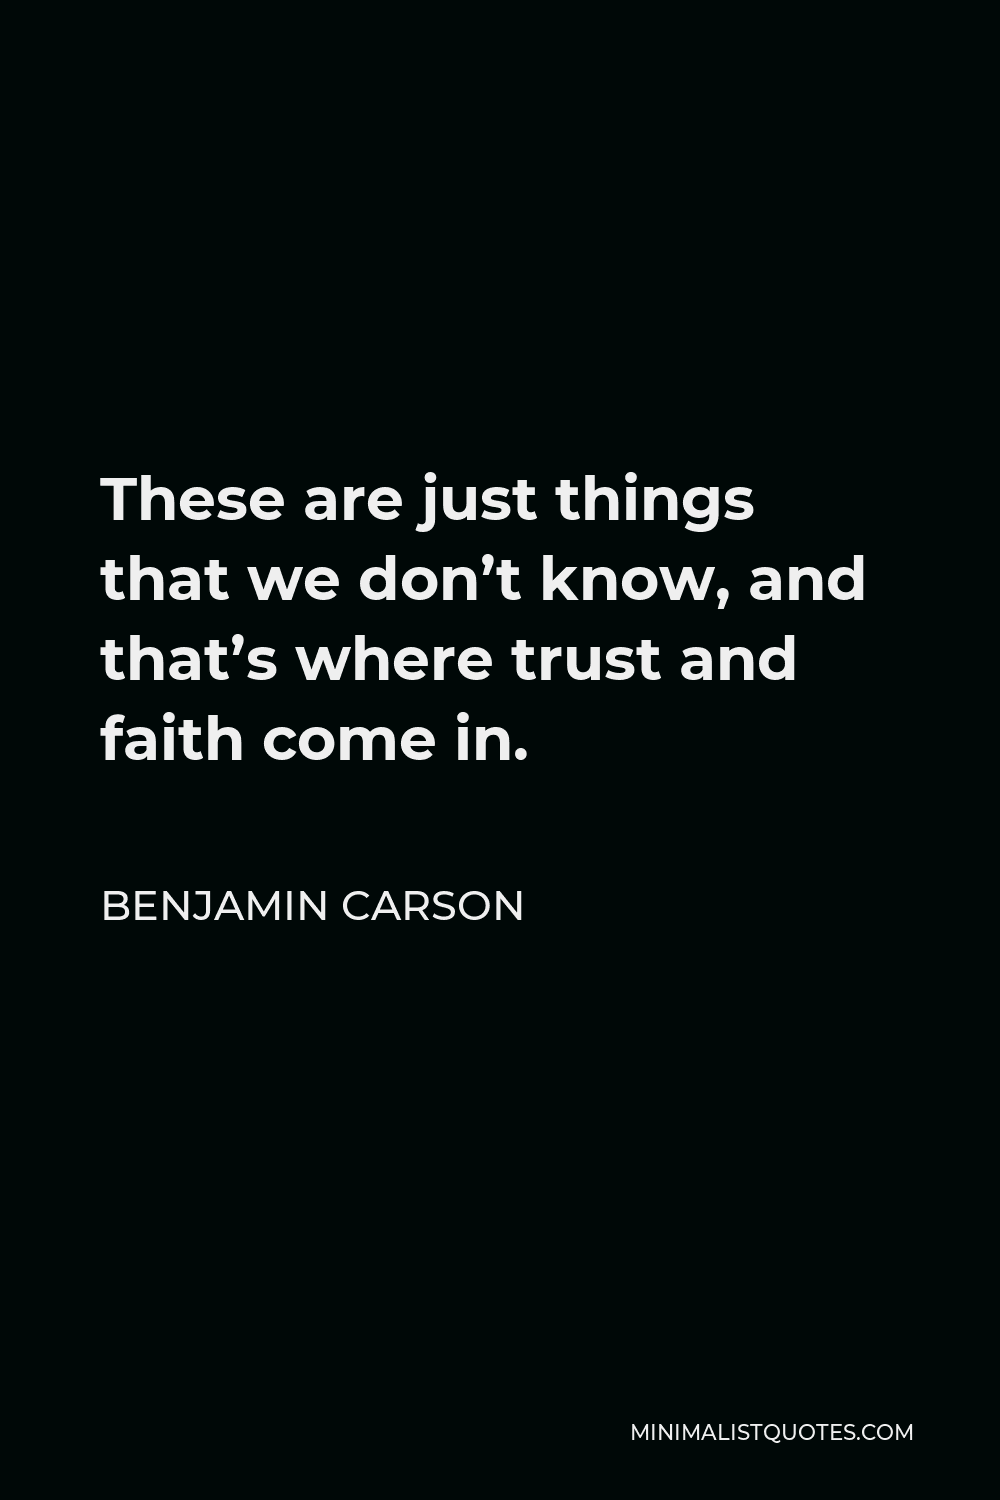 Benjamin Carson Quote - These are just things that we don’t know, and that’s where trust and faith come in.